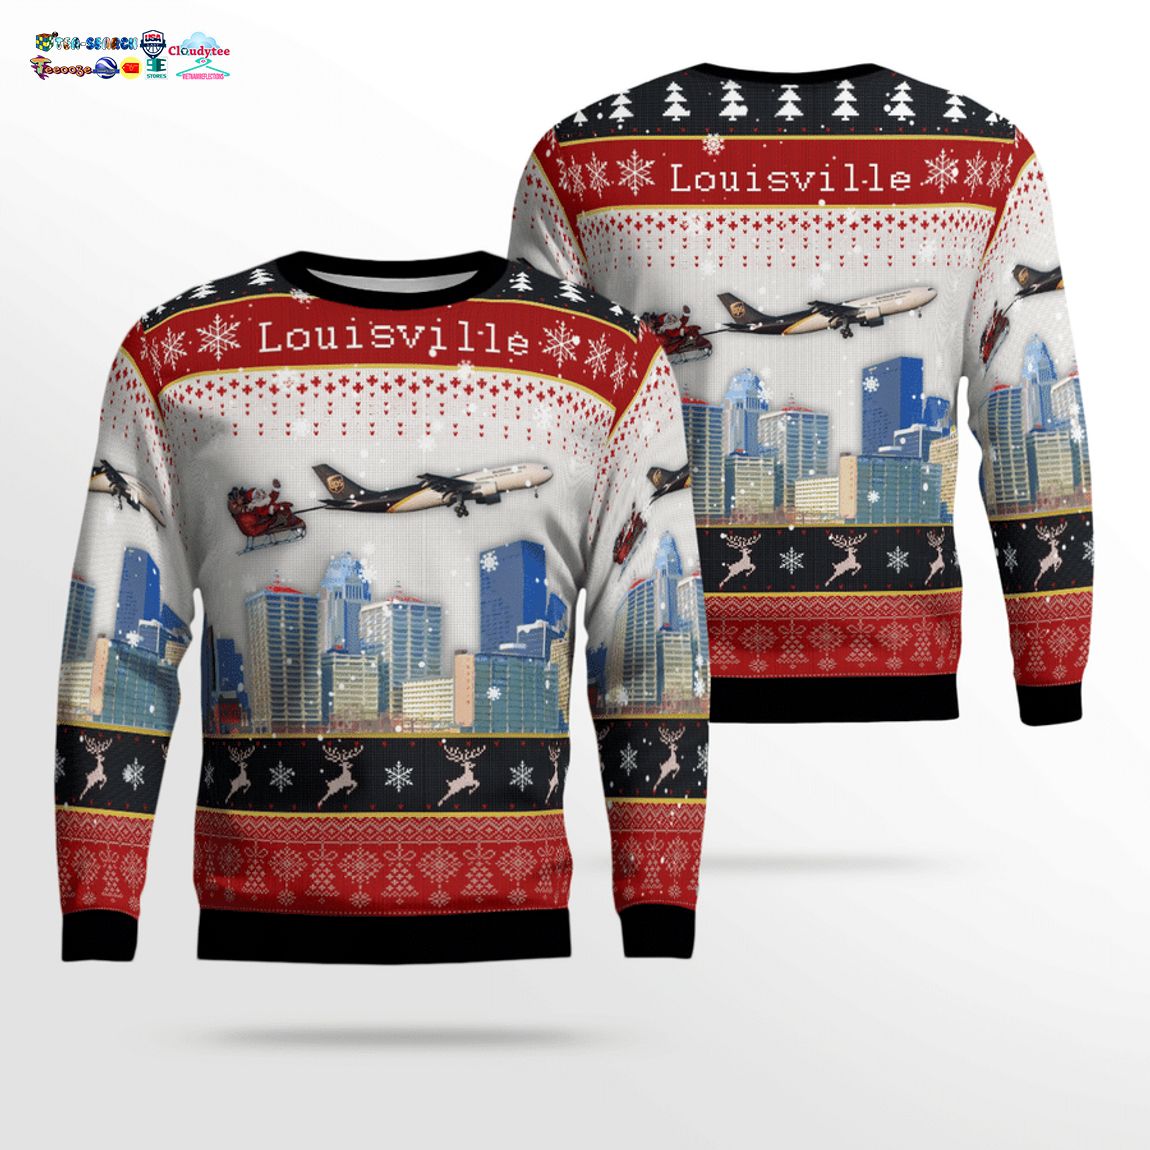 ups-airlines-airbus-a300f4-622r-with-santa-over-louisville-3d-christmas-sweater-1-rfV5p.jpg